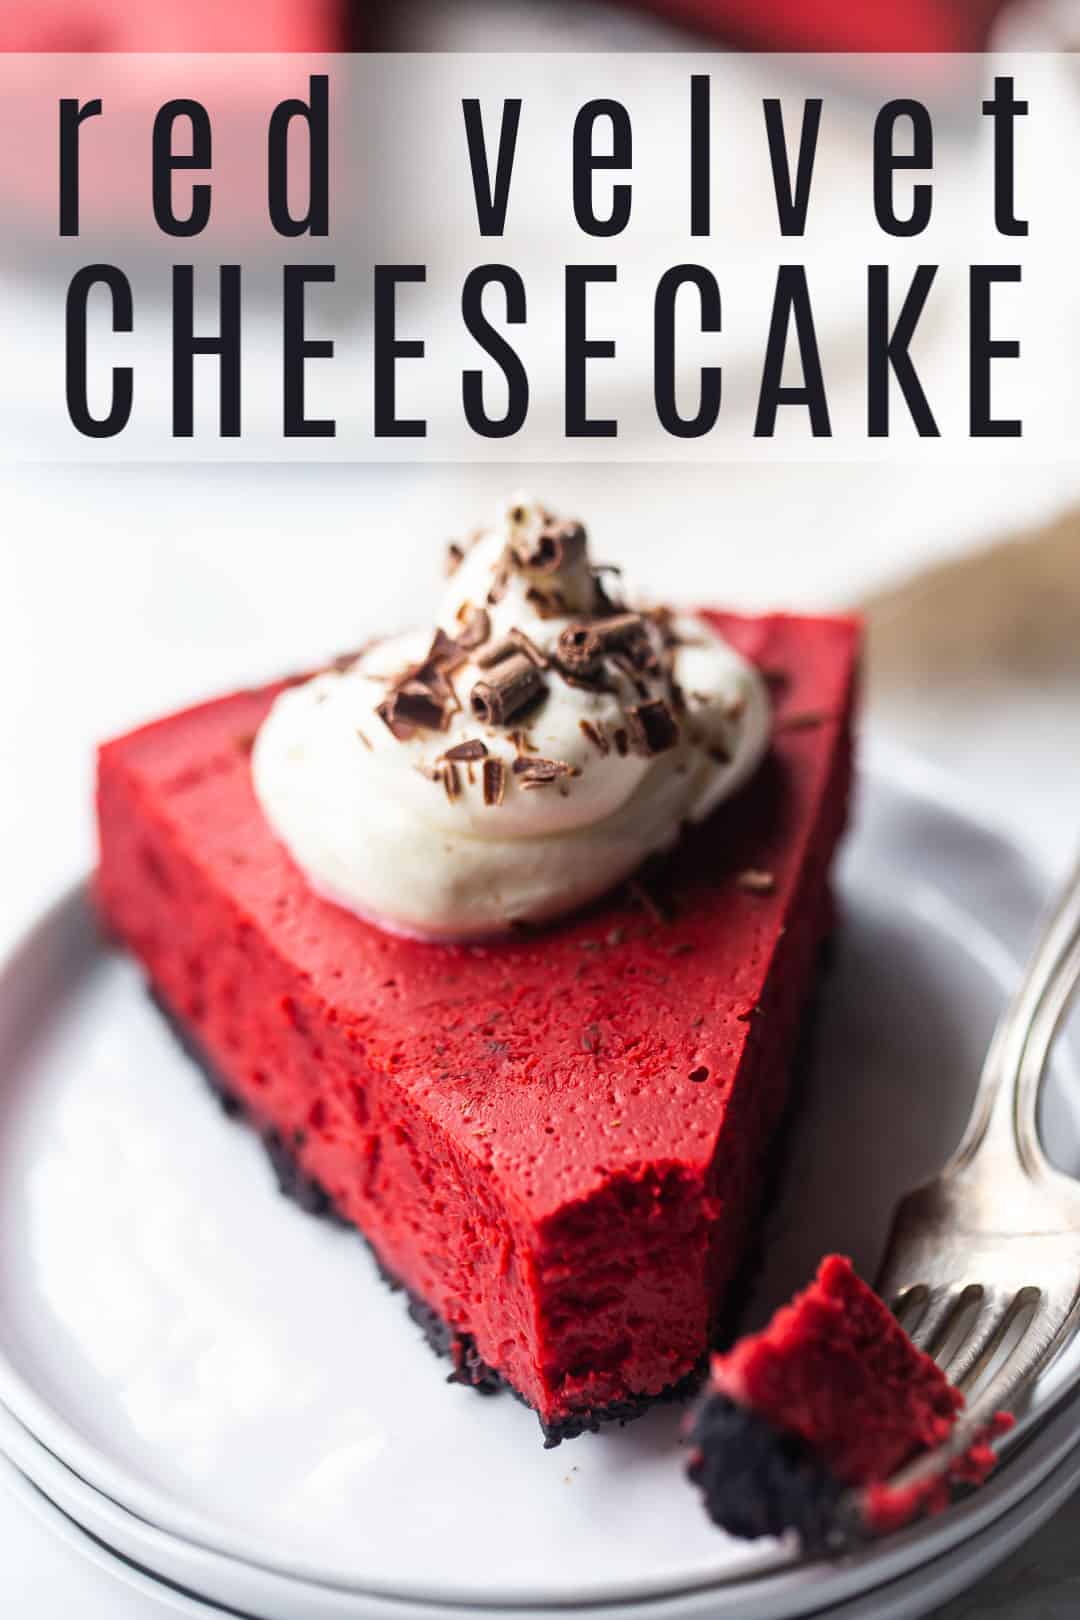 Red velvet cheesecake recipe, baked and served on a white plate, with a text overlay above that reads "Red Velvet Cheesecake."